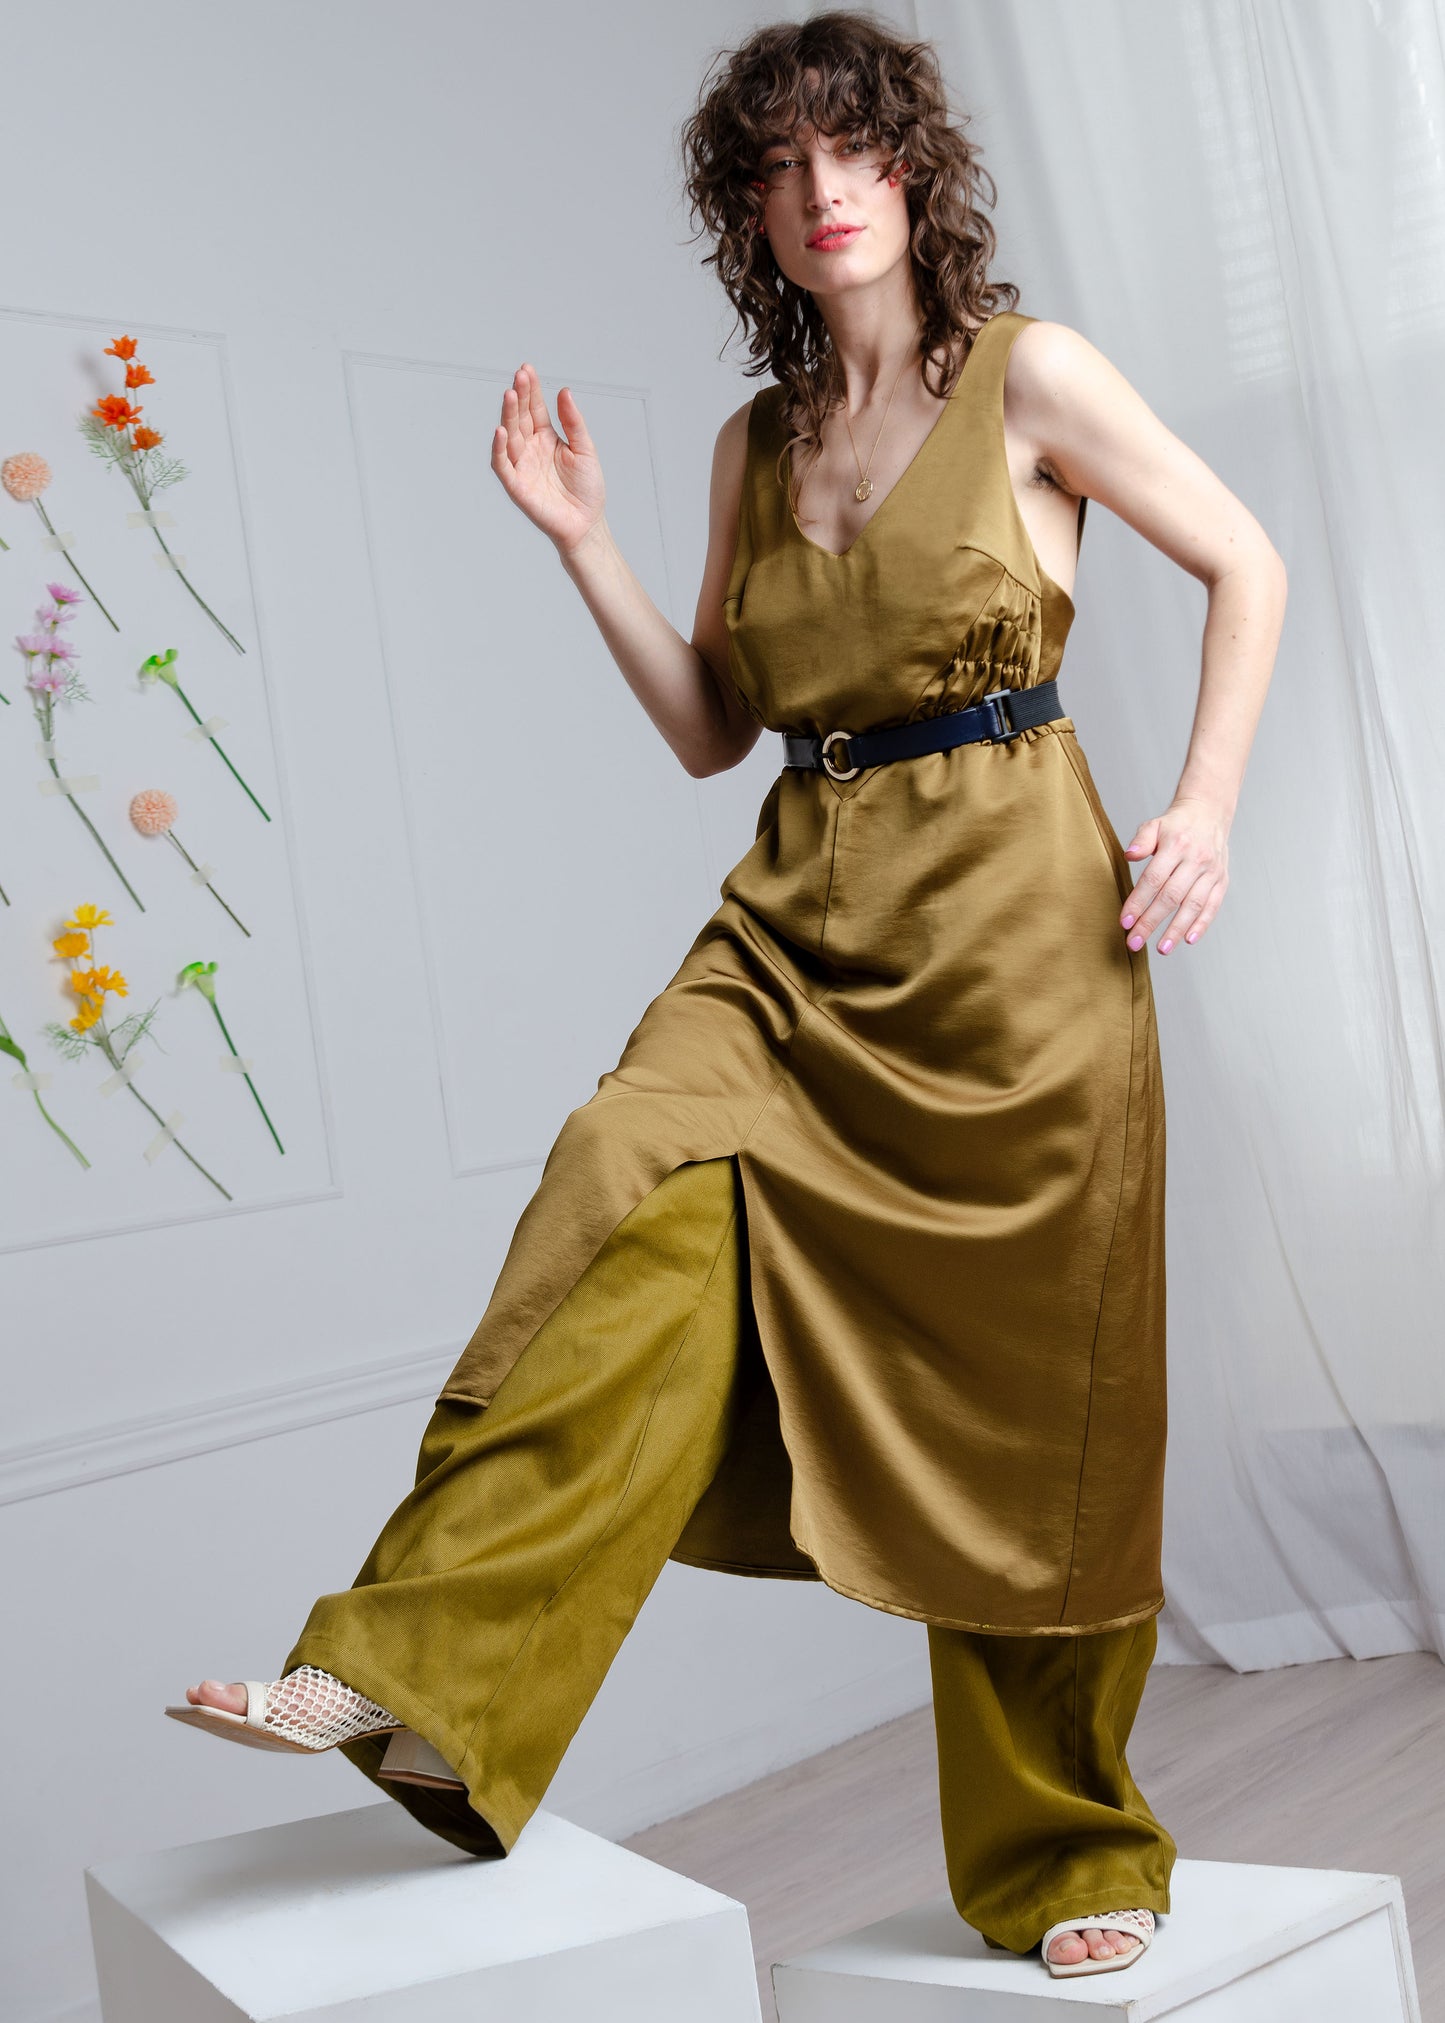 Form skimming Midi length A-line dress with gathered side panels and very low back. Khaki  green satin fabric